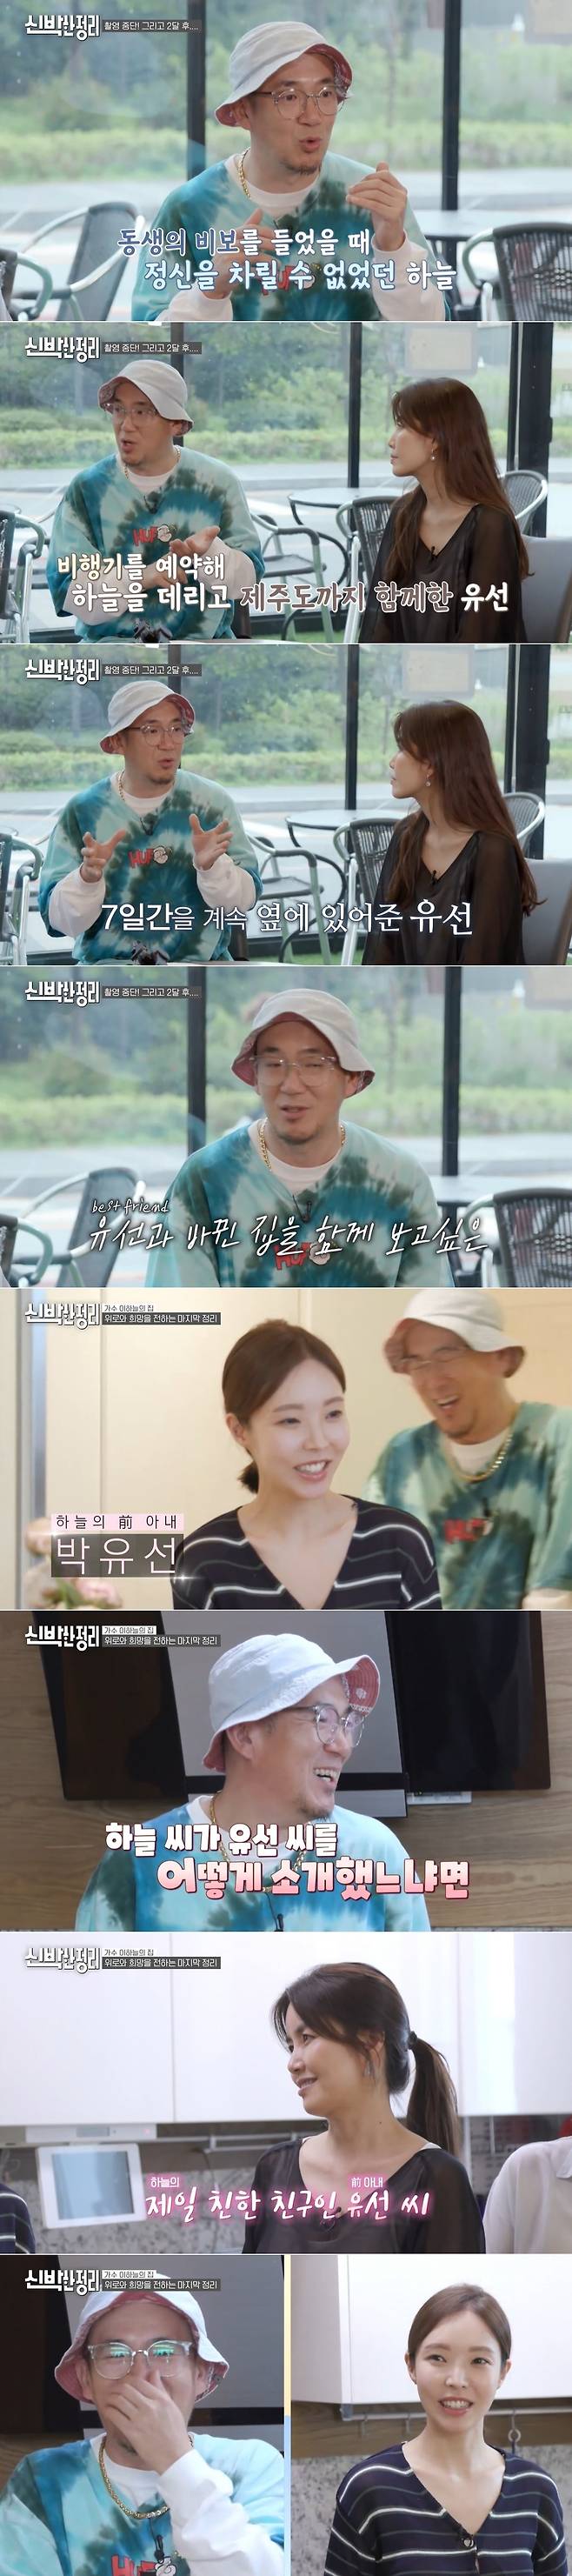 Lee Ha-Neul thanked his ex-wife Park Yoo-Seon, describing him as best friend.In the TVN Fresh Arrangement broadcast on July 5, Lee Ha-Neul revealed his recent situation after his brothers late Smash Death.Smash, in particular, was shown organizing the room she used in her lifetime, leaving viewers saddened by her heart condition about two months ago.Lee Ha-Neul said after his brother Death, I did not know what I had to do because the fun of life was gone, he said. I do not remember well for two months.However, he said, I am getting a little better and returning to my daily life.Lee Ha-Neul thanked his ex-wife Park Yoo-Seon more than anyone else, saying, It is the first friend to run when I am in trouble.I first got a (brother Death) phone call and panic came and I couldnt get my head in, but this Friend booked a plane and took me down to Jeju Island.I was so grateful for Friend, and I was more grateful for this opportunity, and I thought I should run when he was in trouble for the rest of my life.Its the best friend, she said fondly.